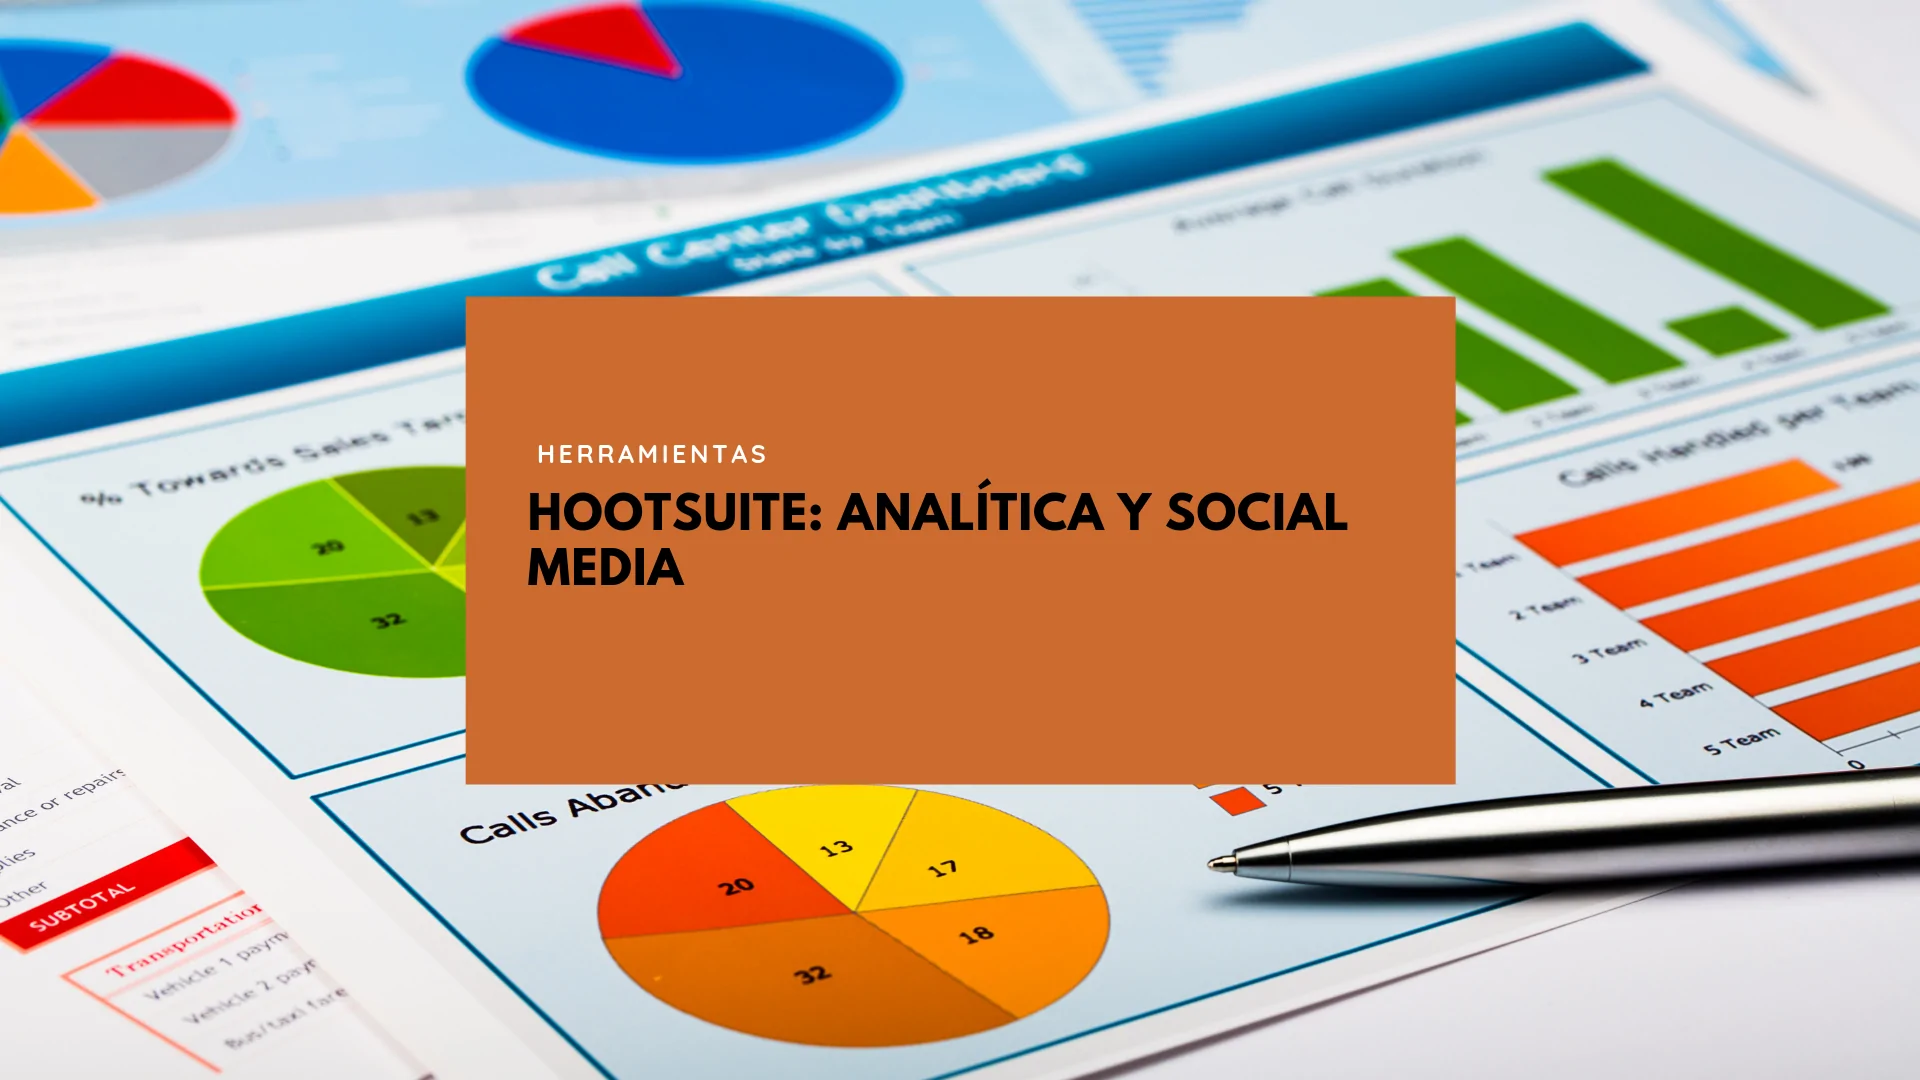 Cover of the cover for the article: "Hootsuite: Analytics and Social Media" of Geotelecom's blog.